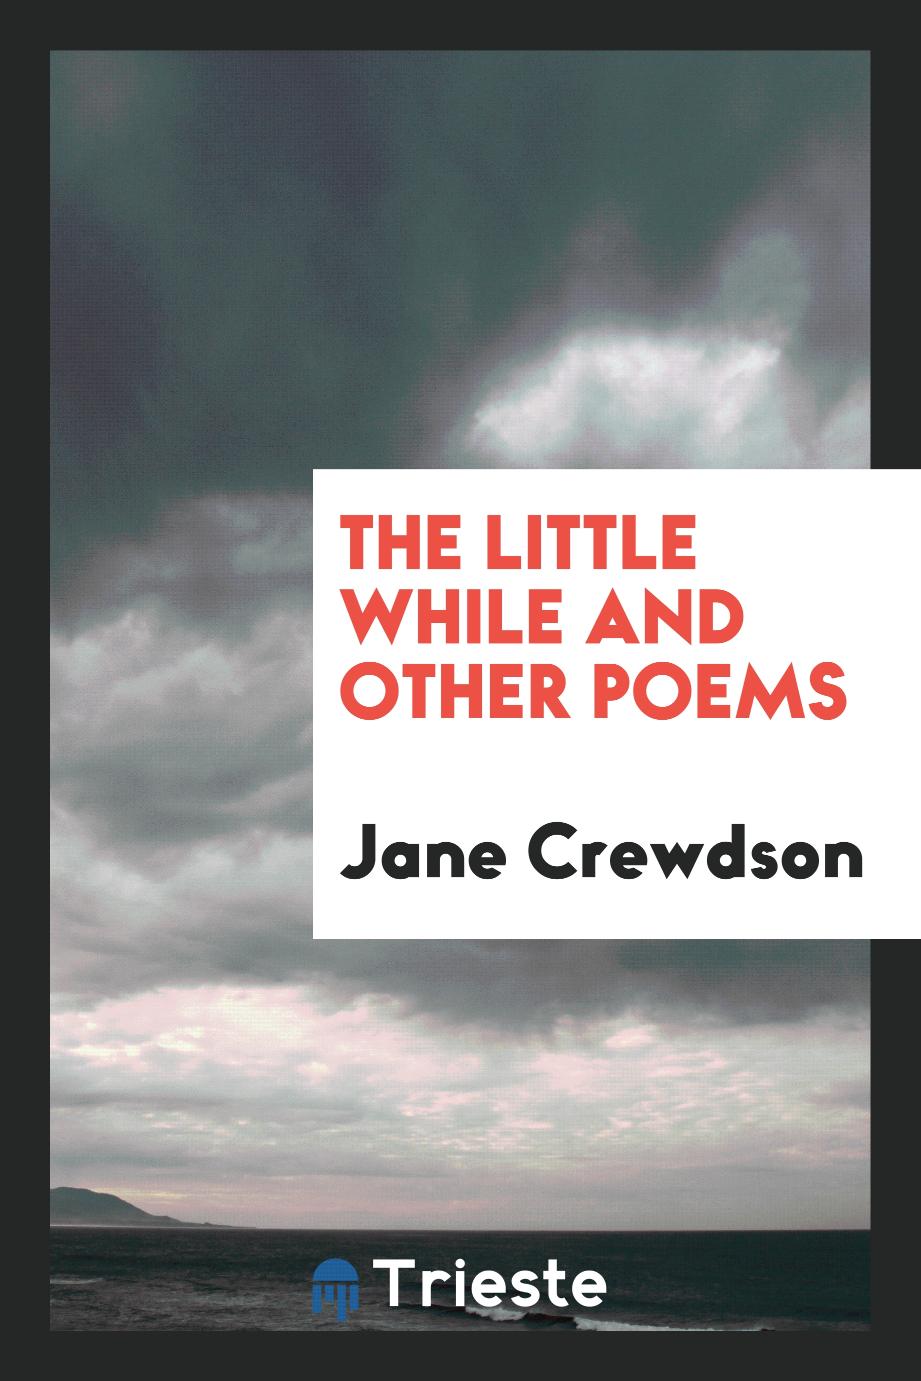 The Little While and Other Poems